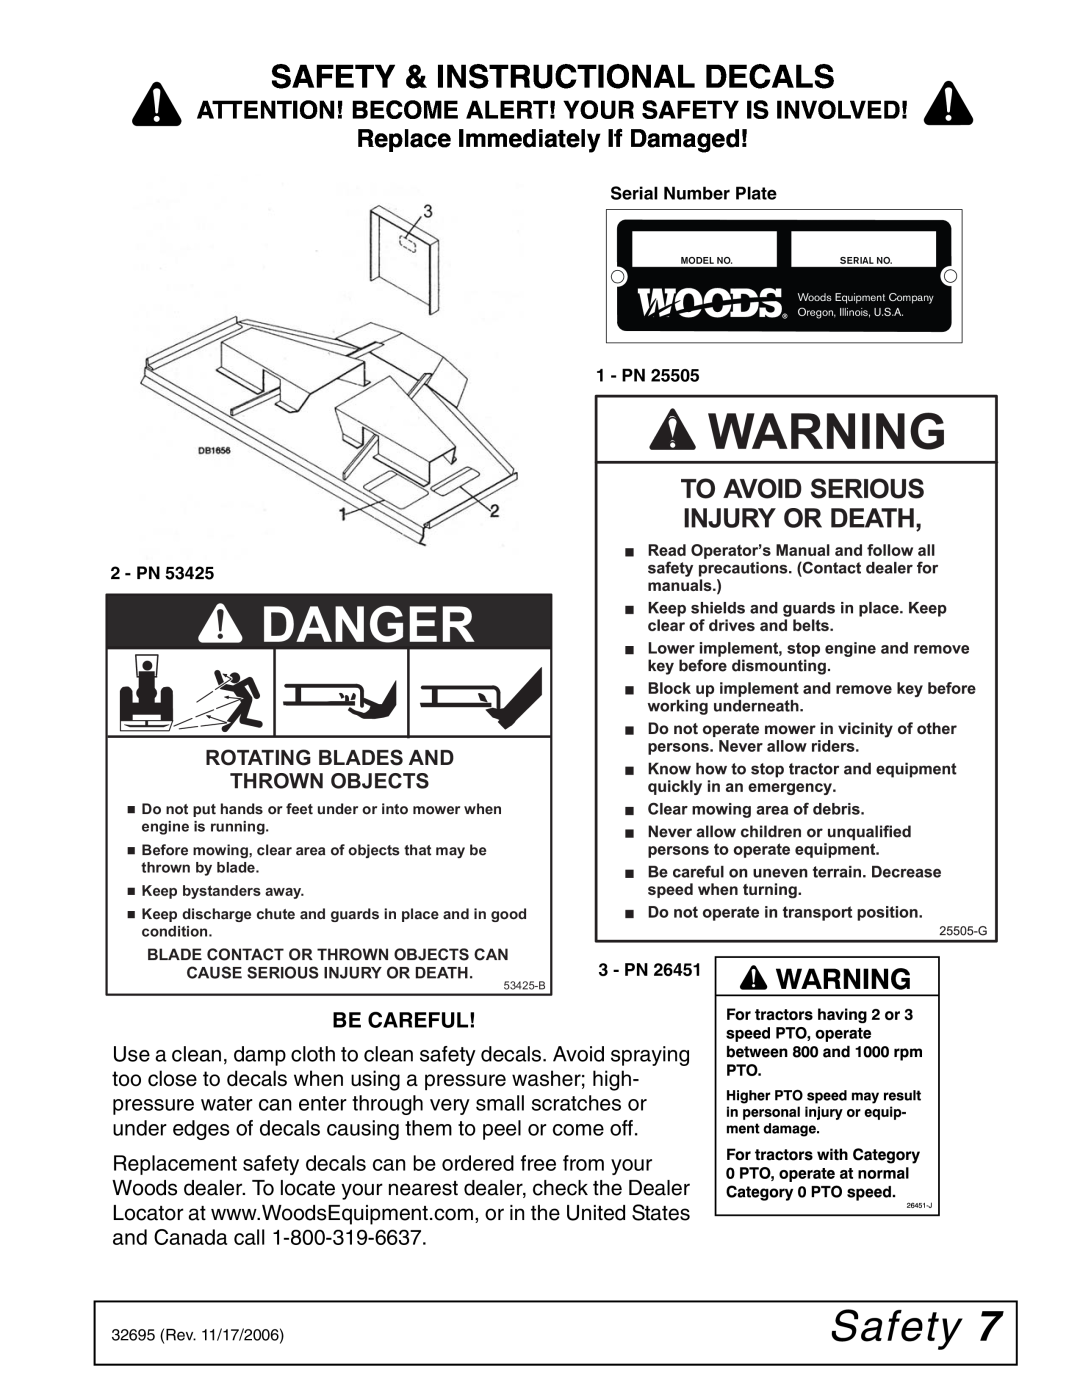 Woods Equipment L306 K50 manual Safety & Instructional Decals, Replace Immediately If Damaged, Be Careful, Danger 